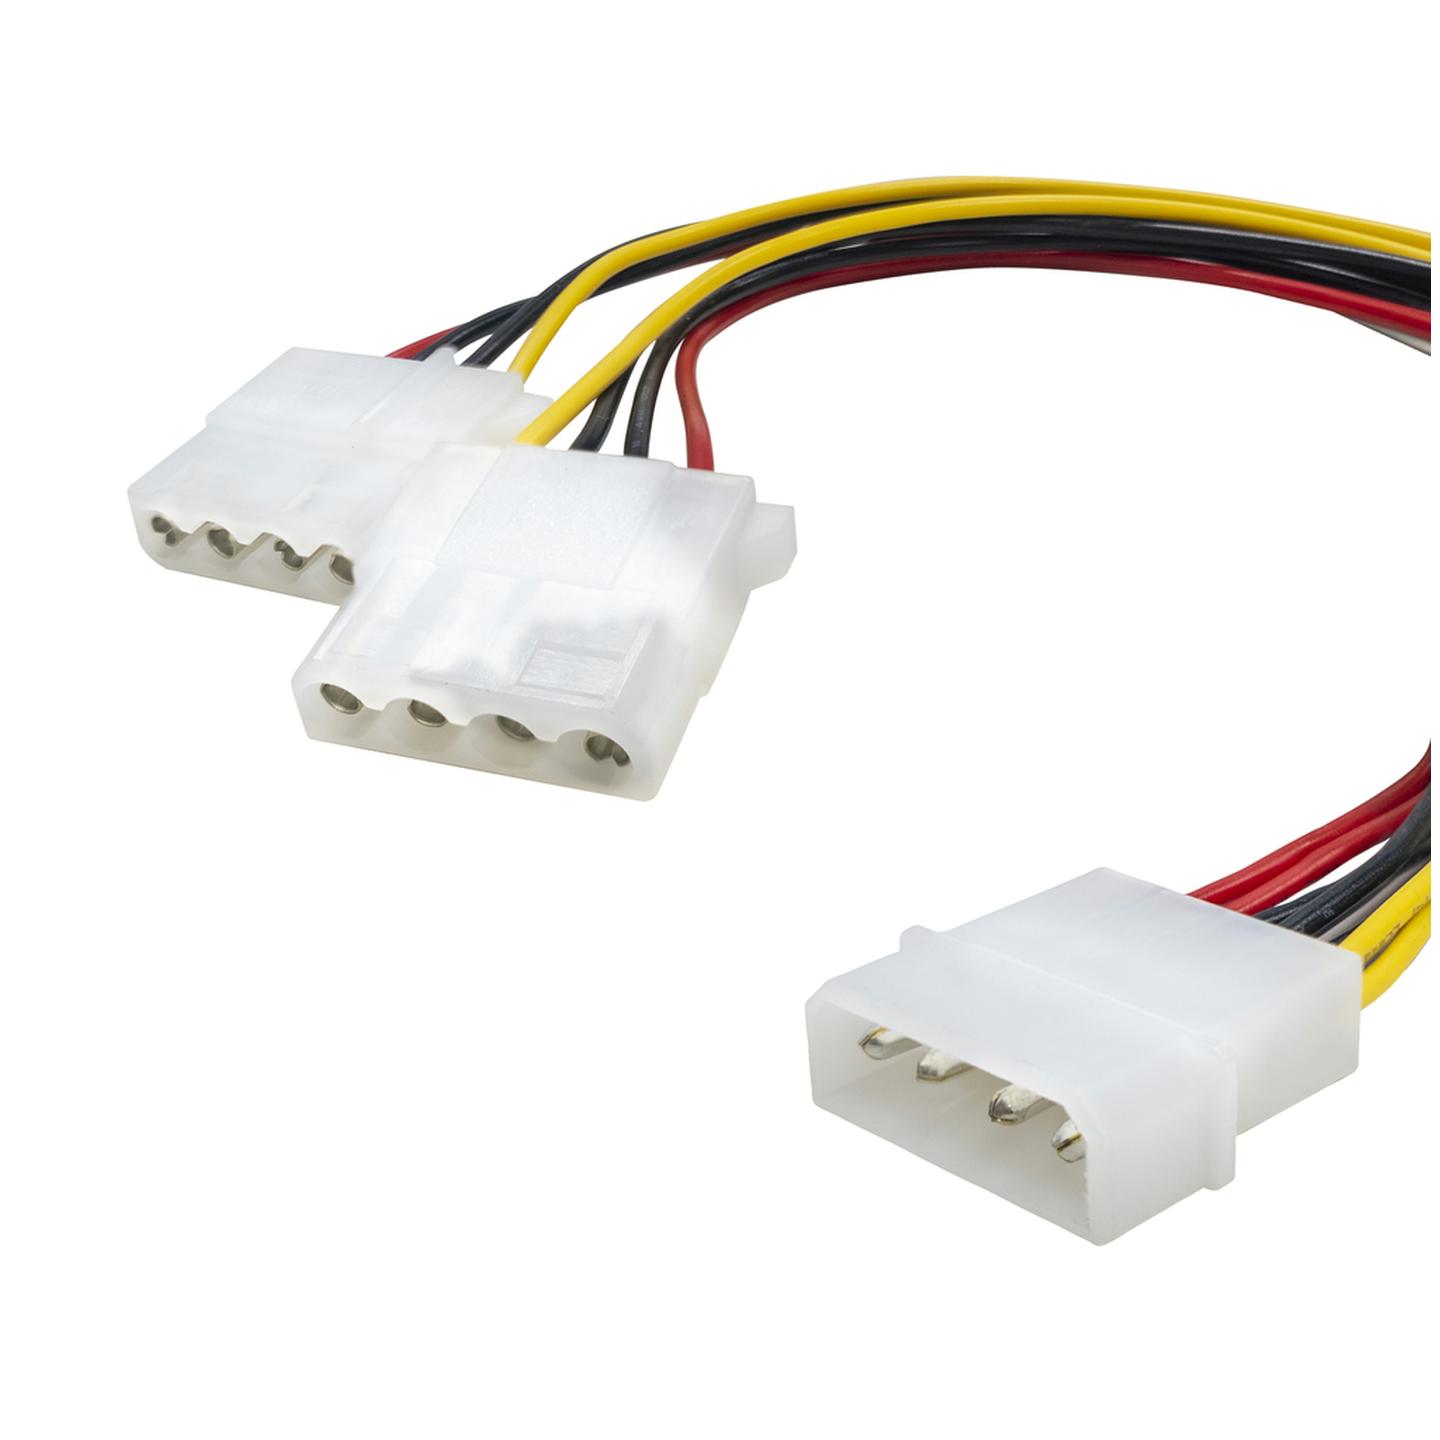 4 Pin Power Splitter Cable For PCs